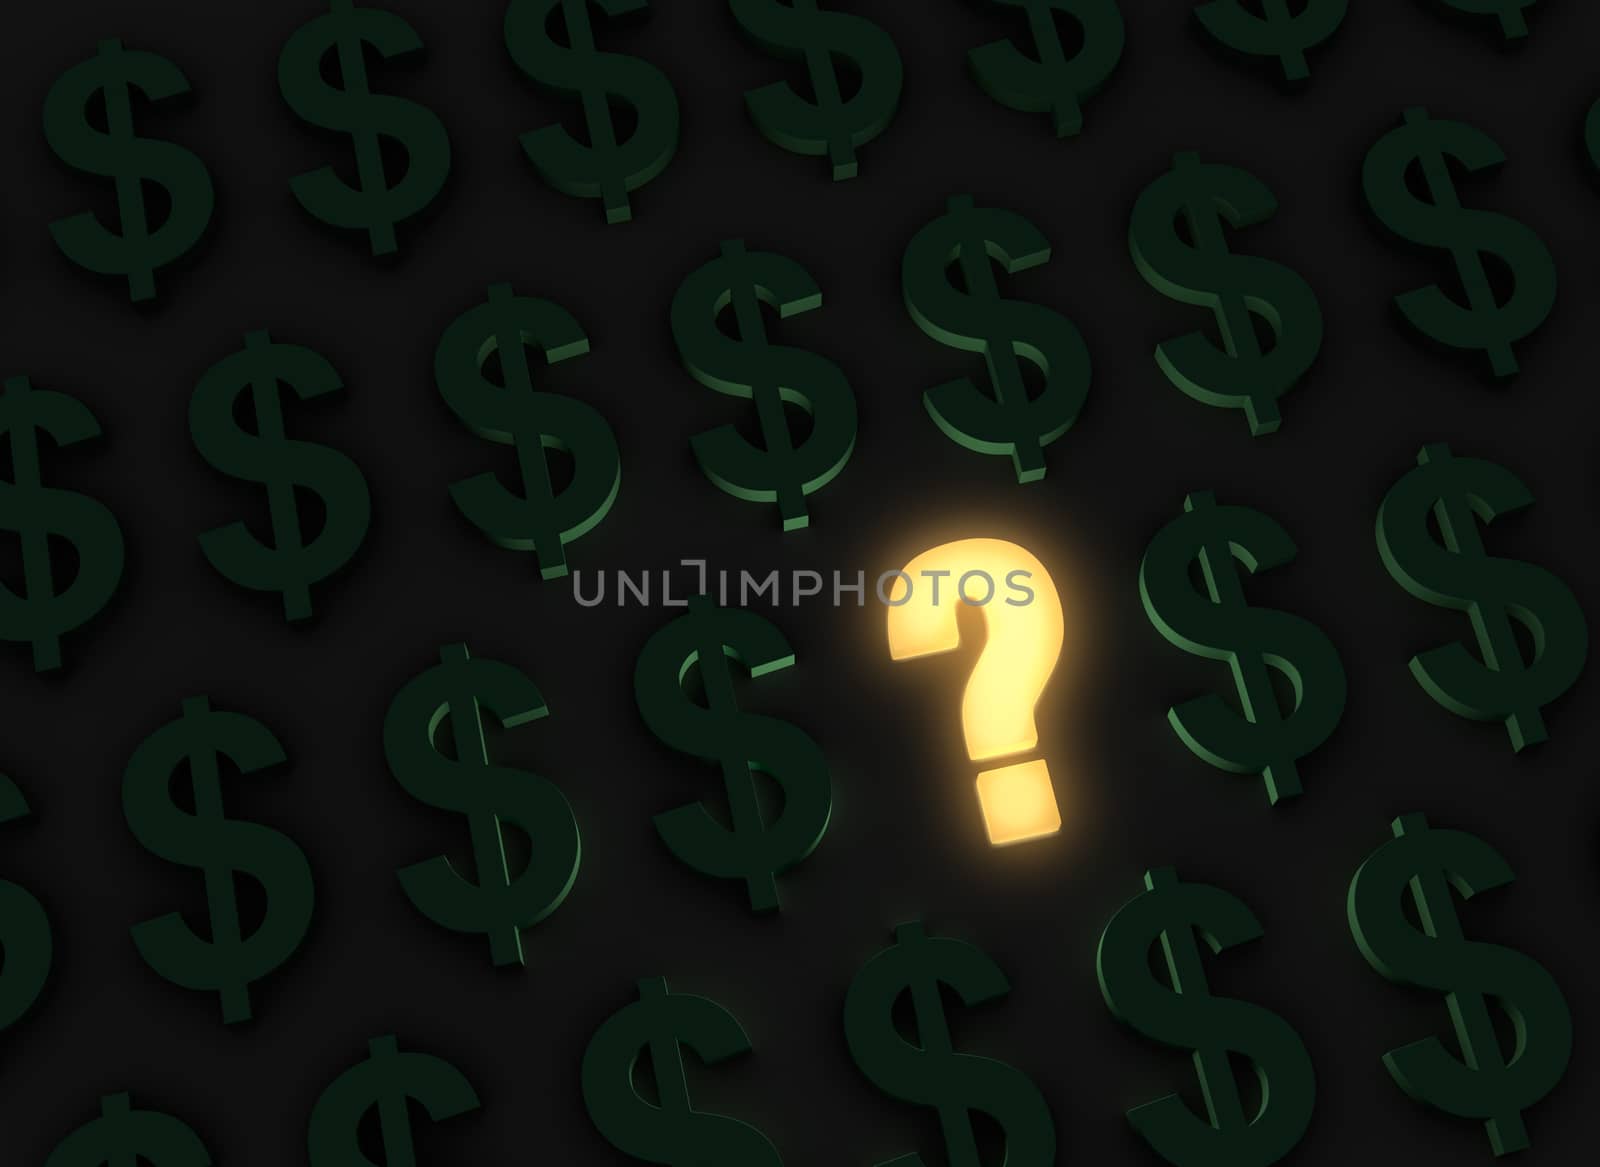 A bright, glowing yellow question stands out in a dark field of green dollar signs